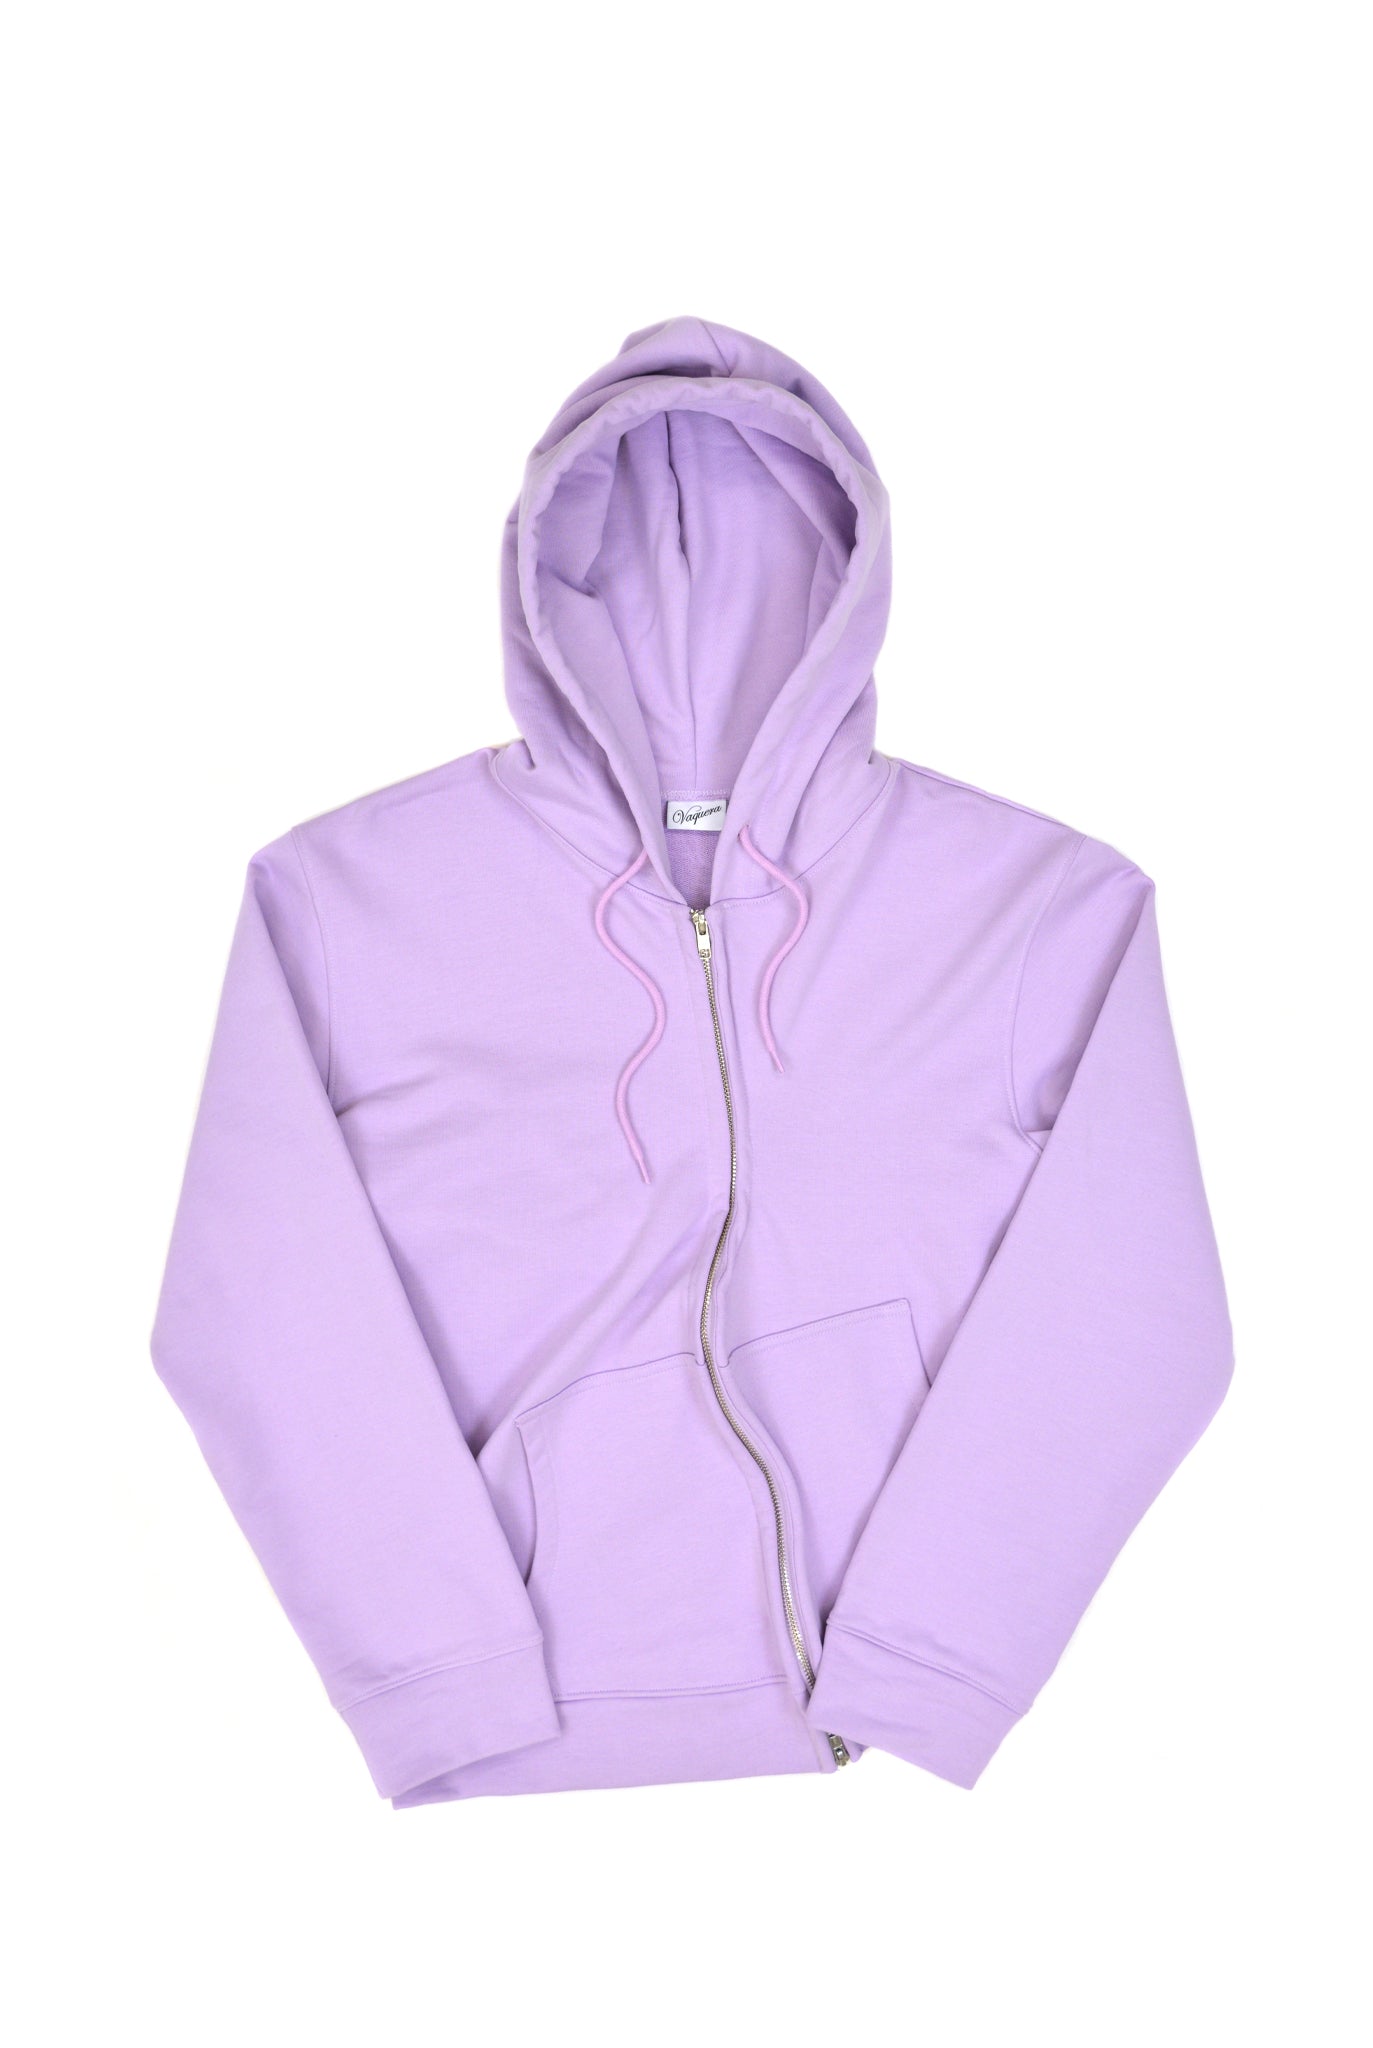 100% Vaquera Twisted Hoodie, Lilac